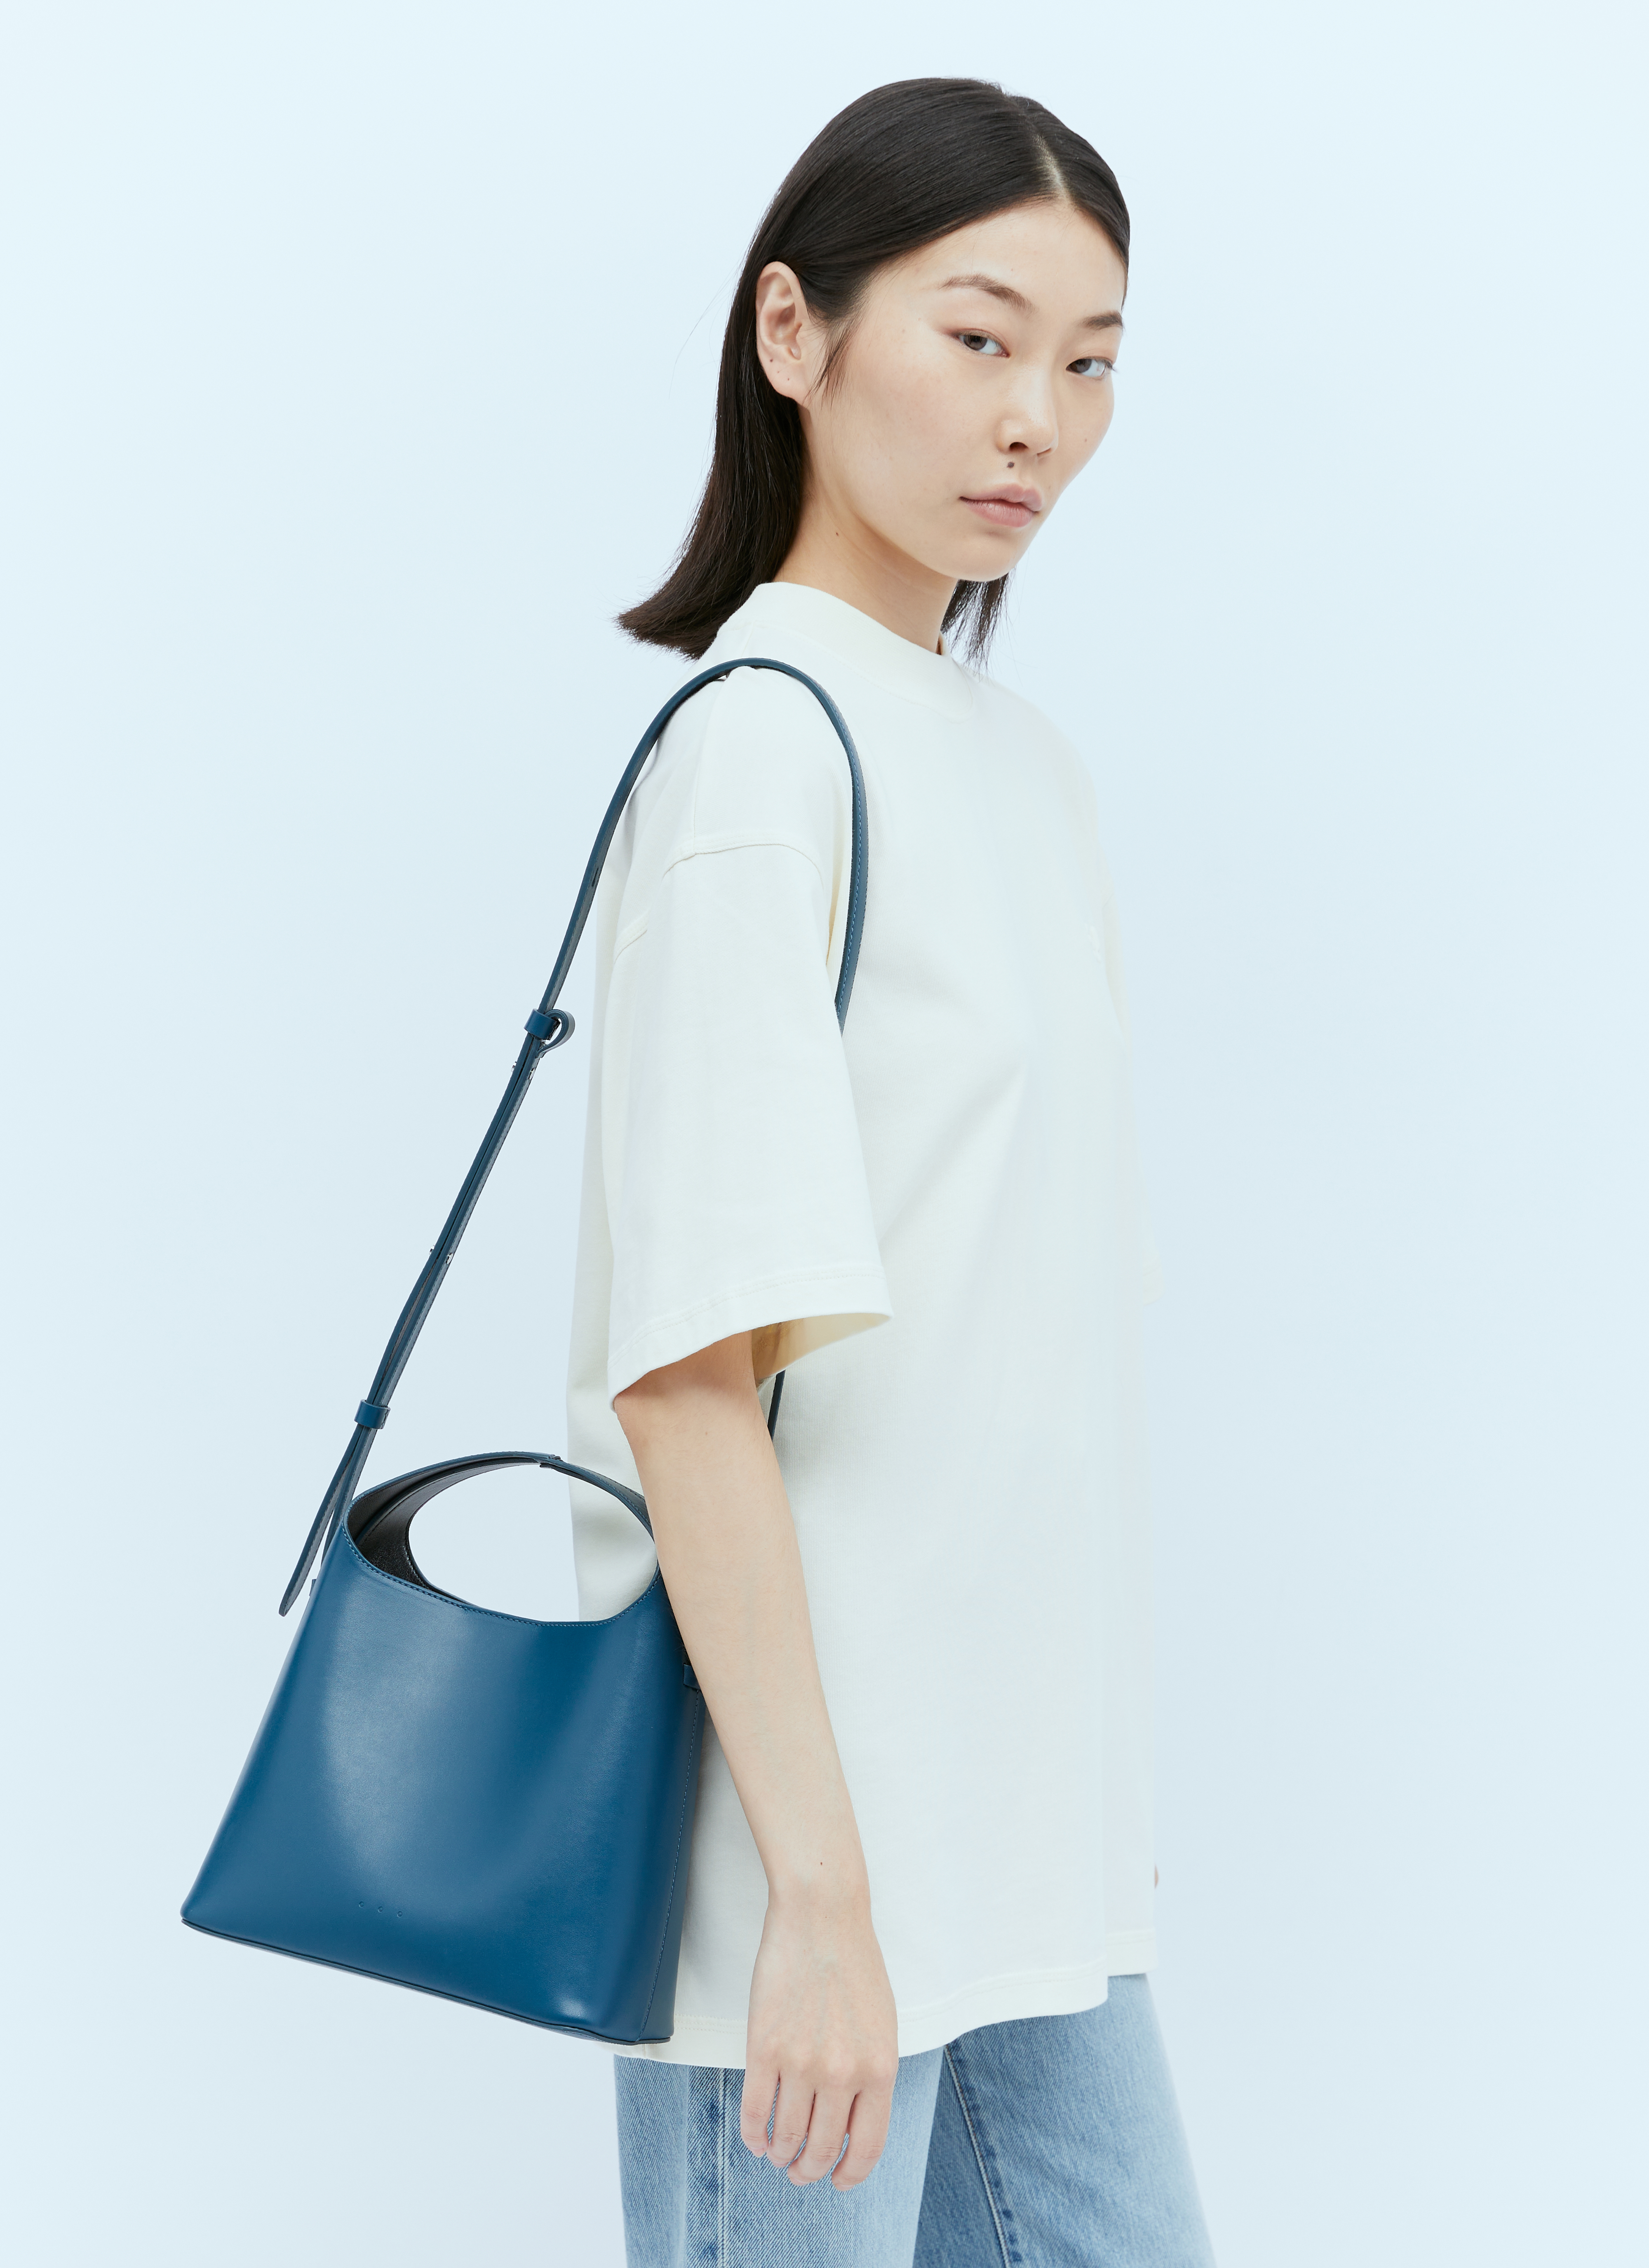 Aesther Ekme - Just launched: Mini Sac in Eclipse Blue